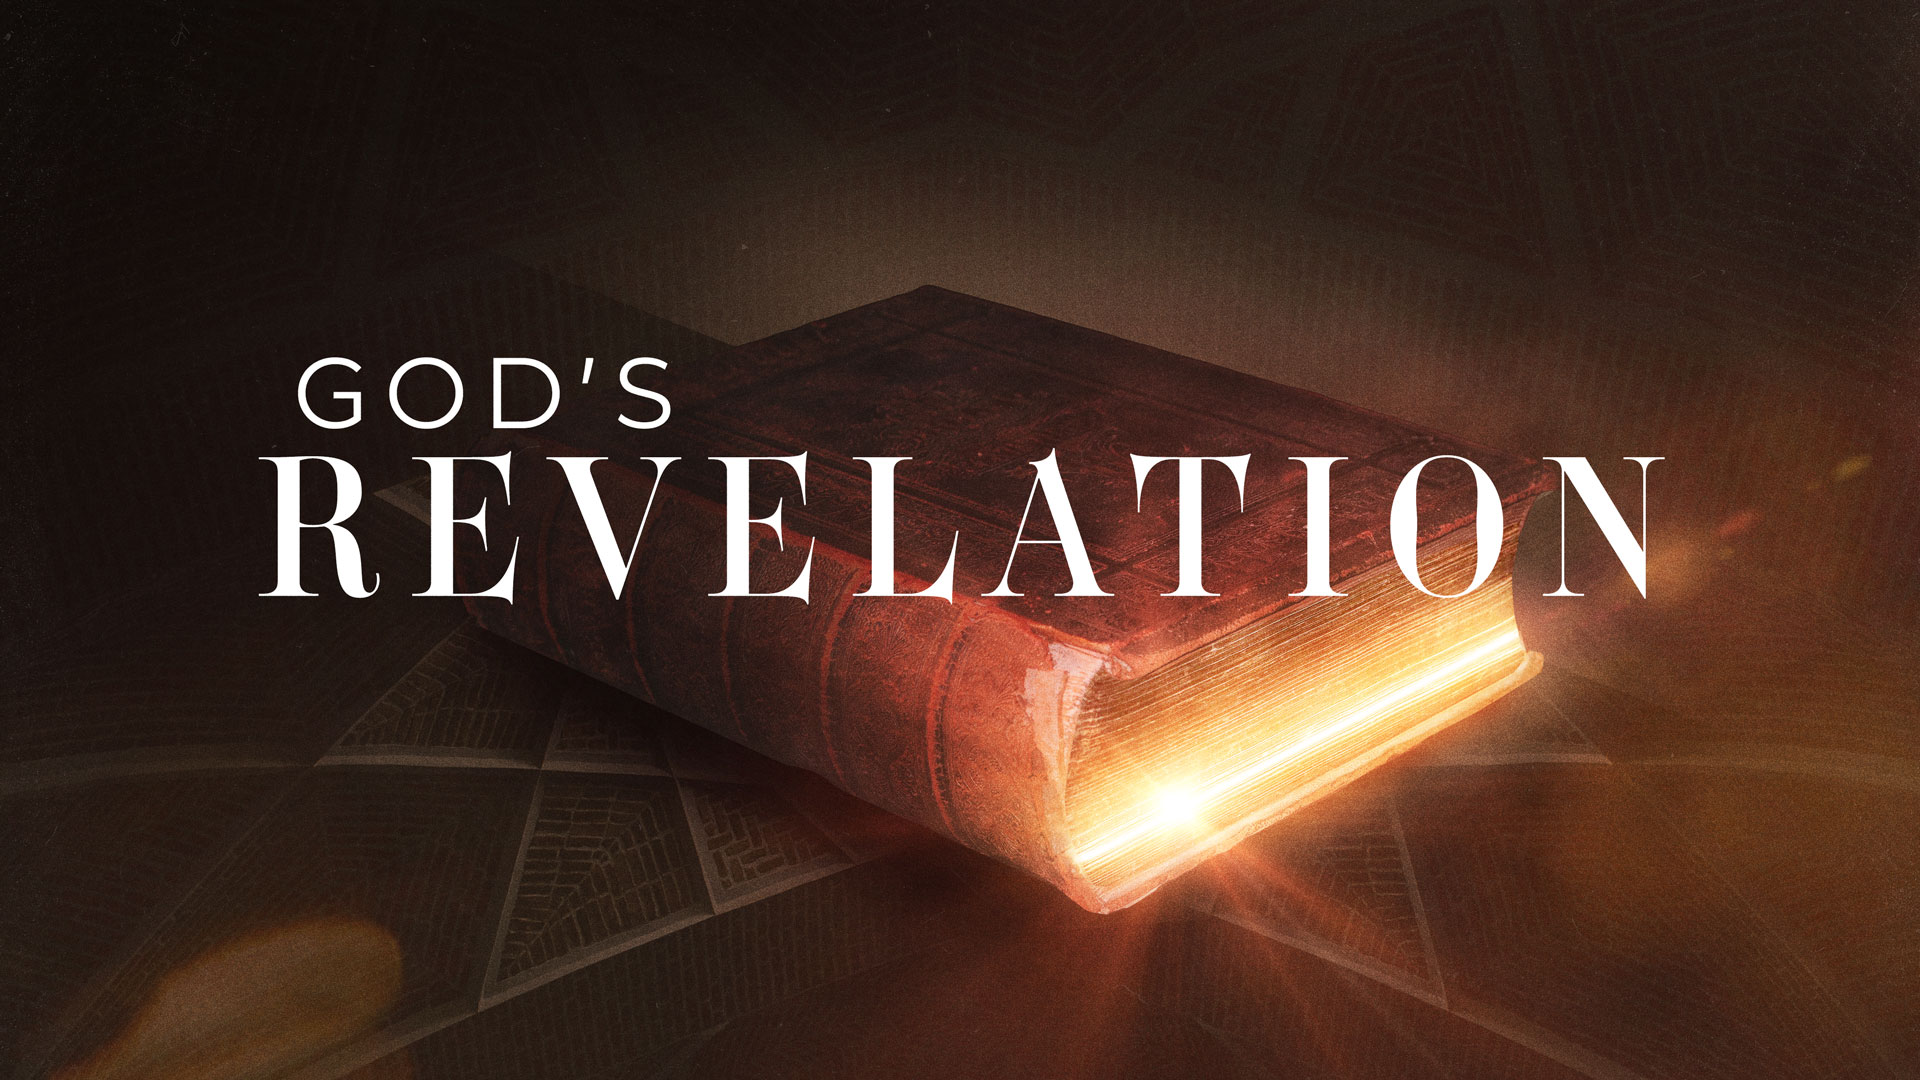 God's Revelation graphic with a Bible that is glowing